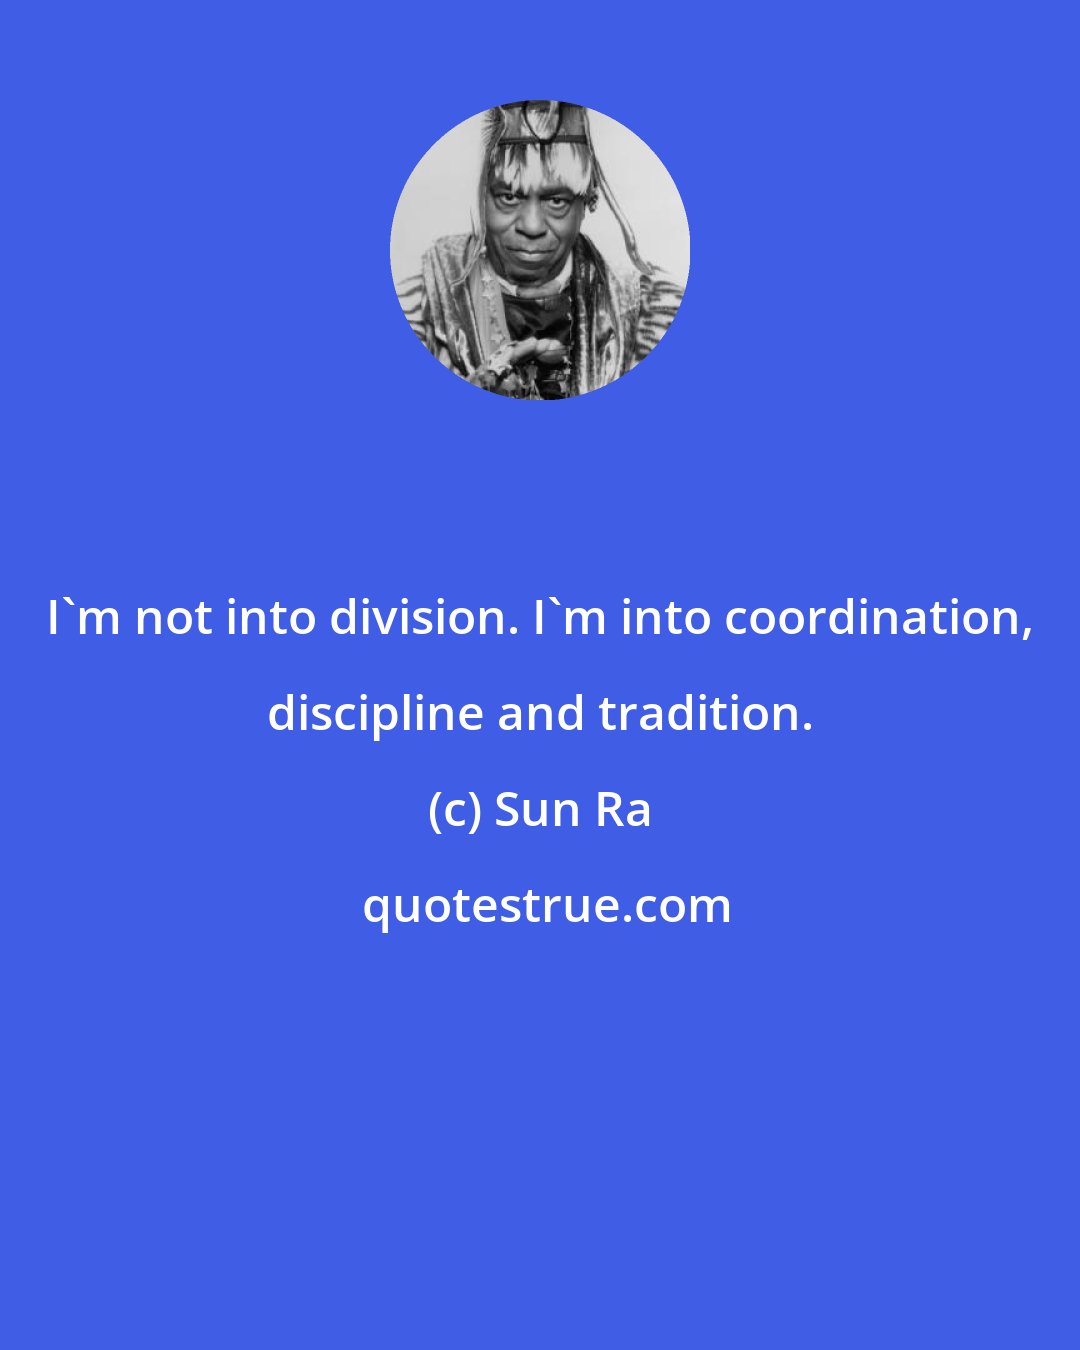 Sun Ra: I'm not into division. I'm into coordination, discipline and tradition.